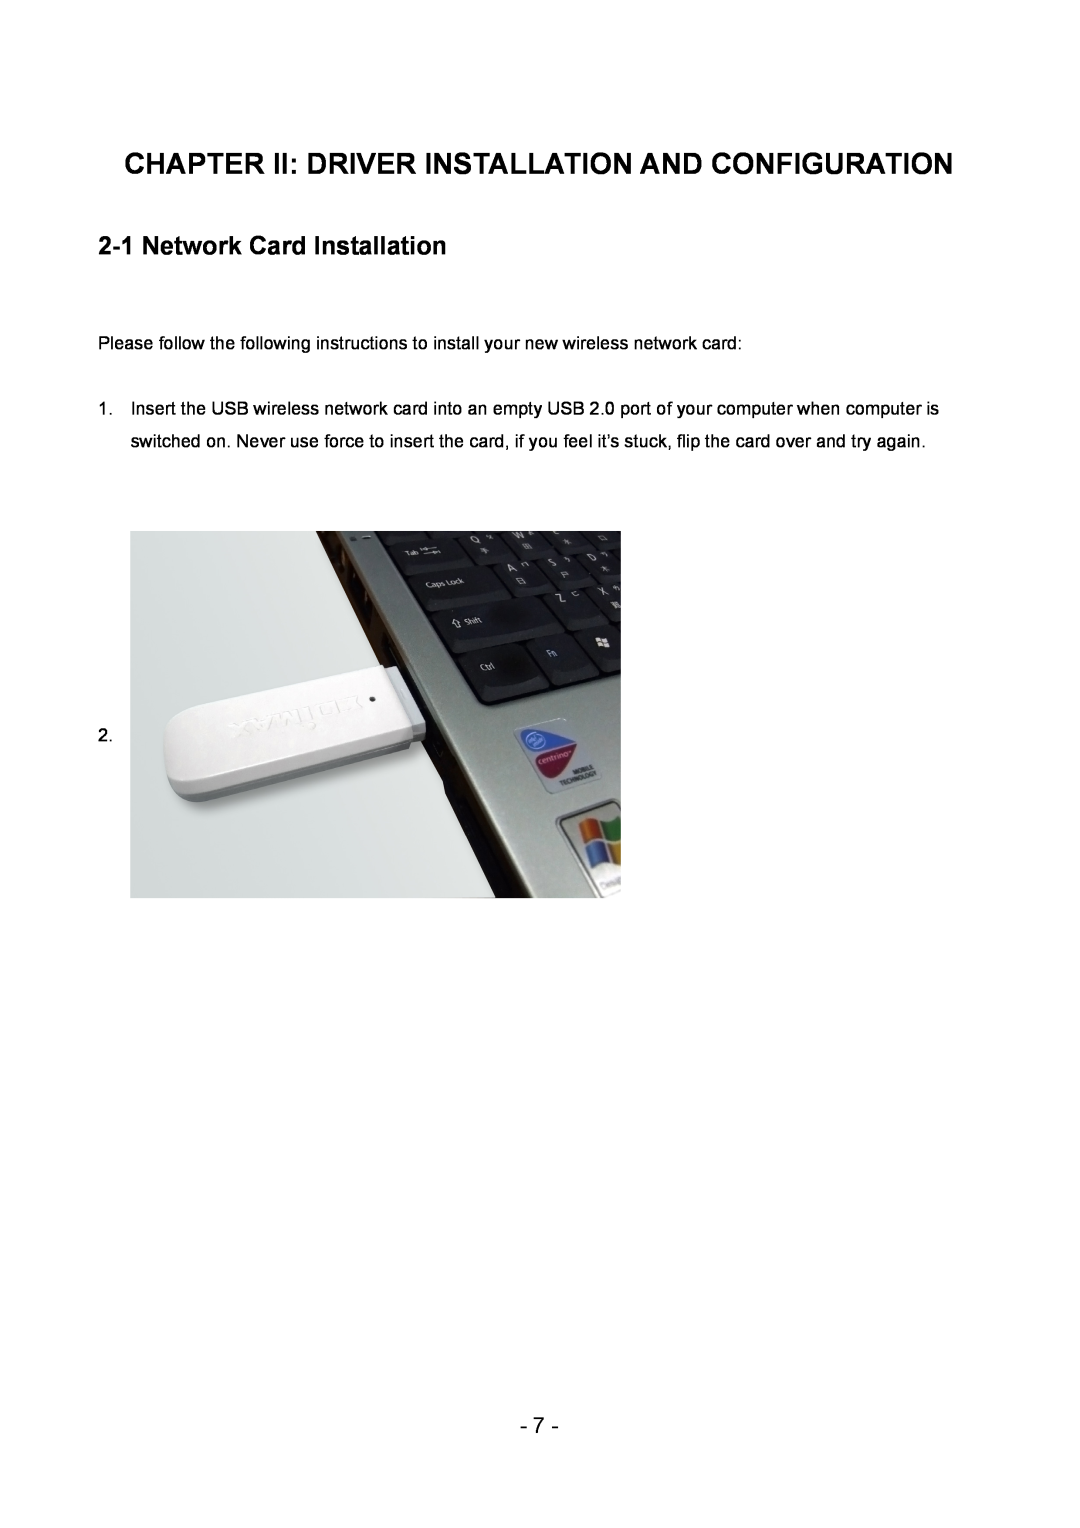 Edimax Technology LAN USB Adapter user manual Chapter Ii Driver Installation And Configuration, Network Card Installation 